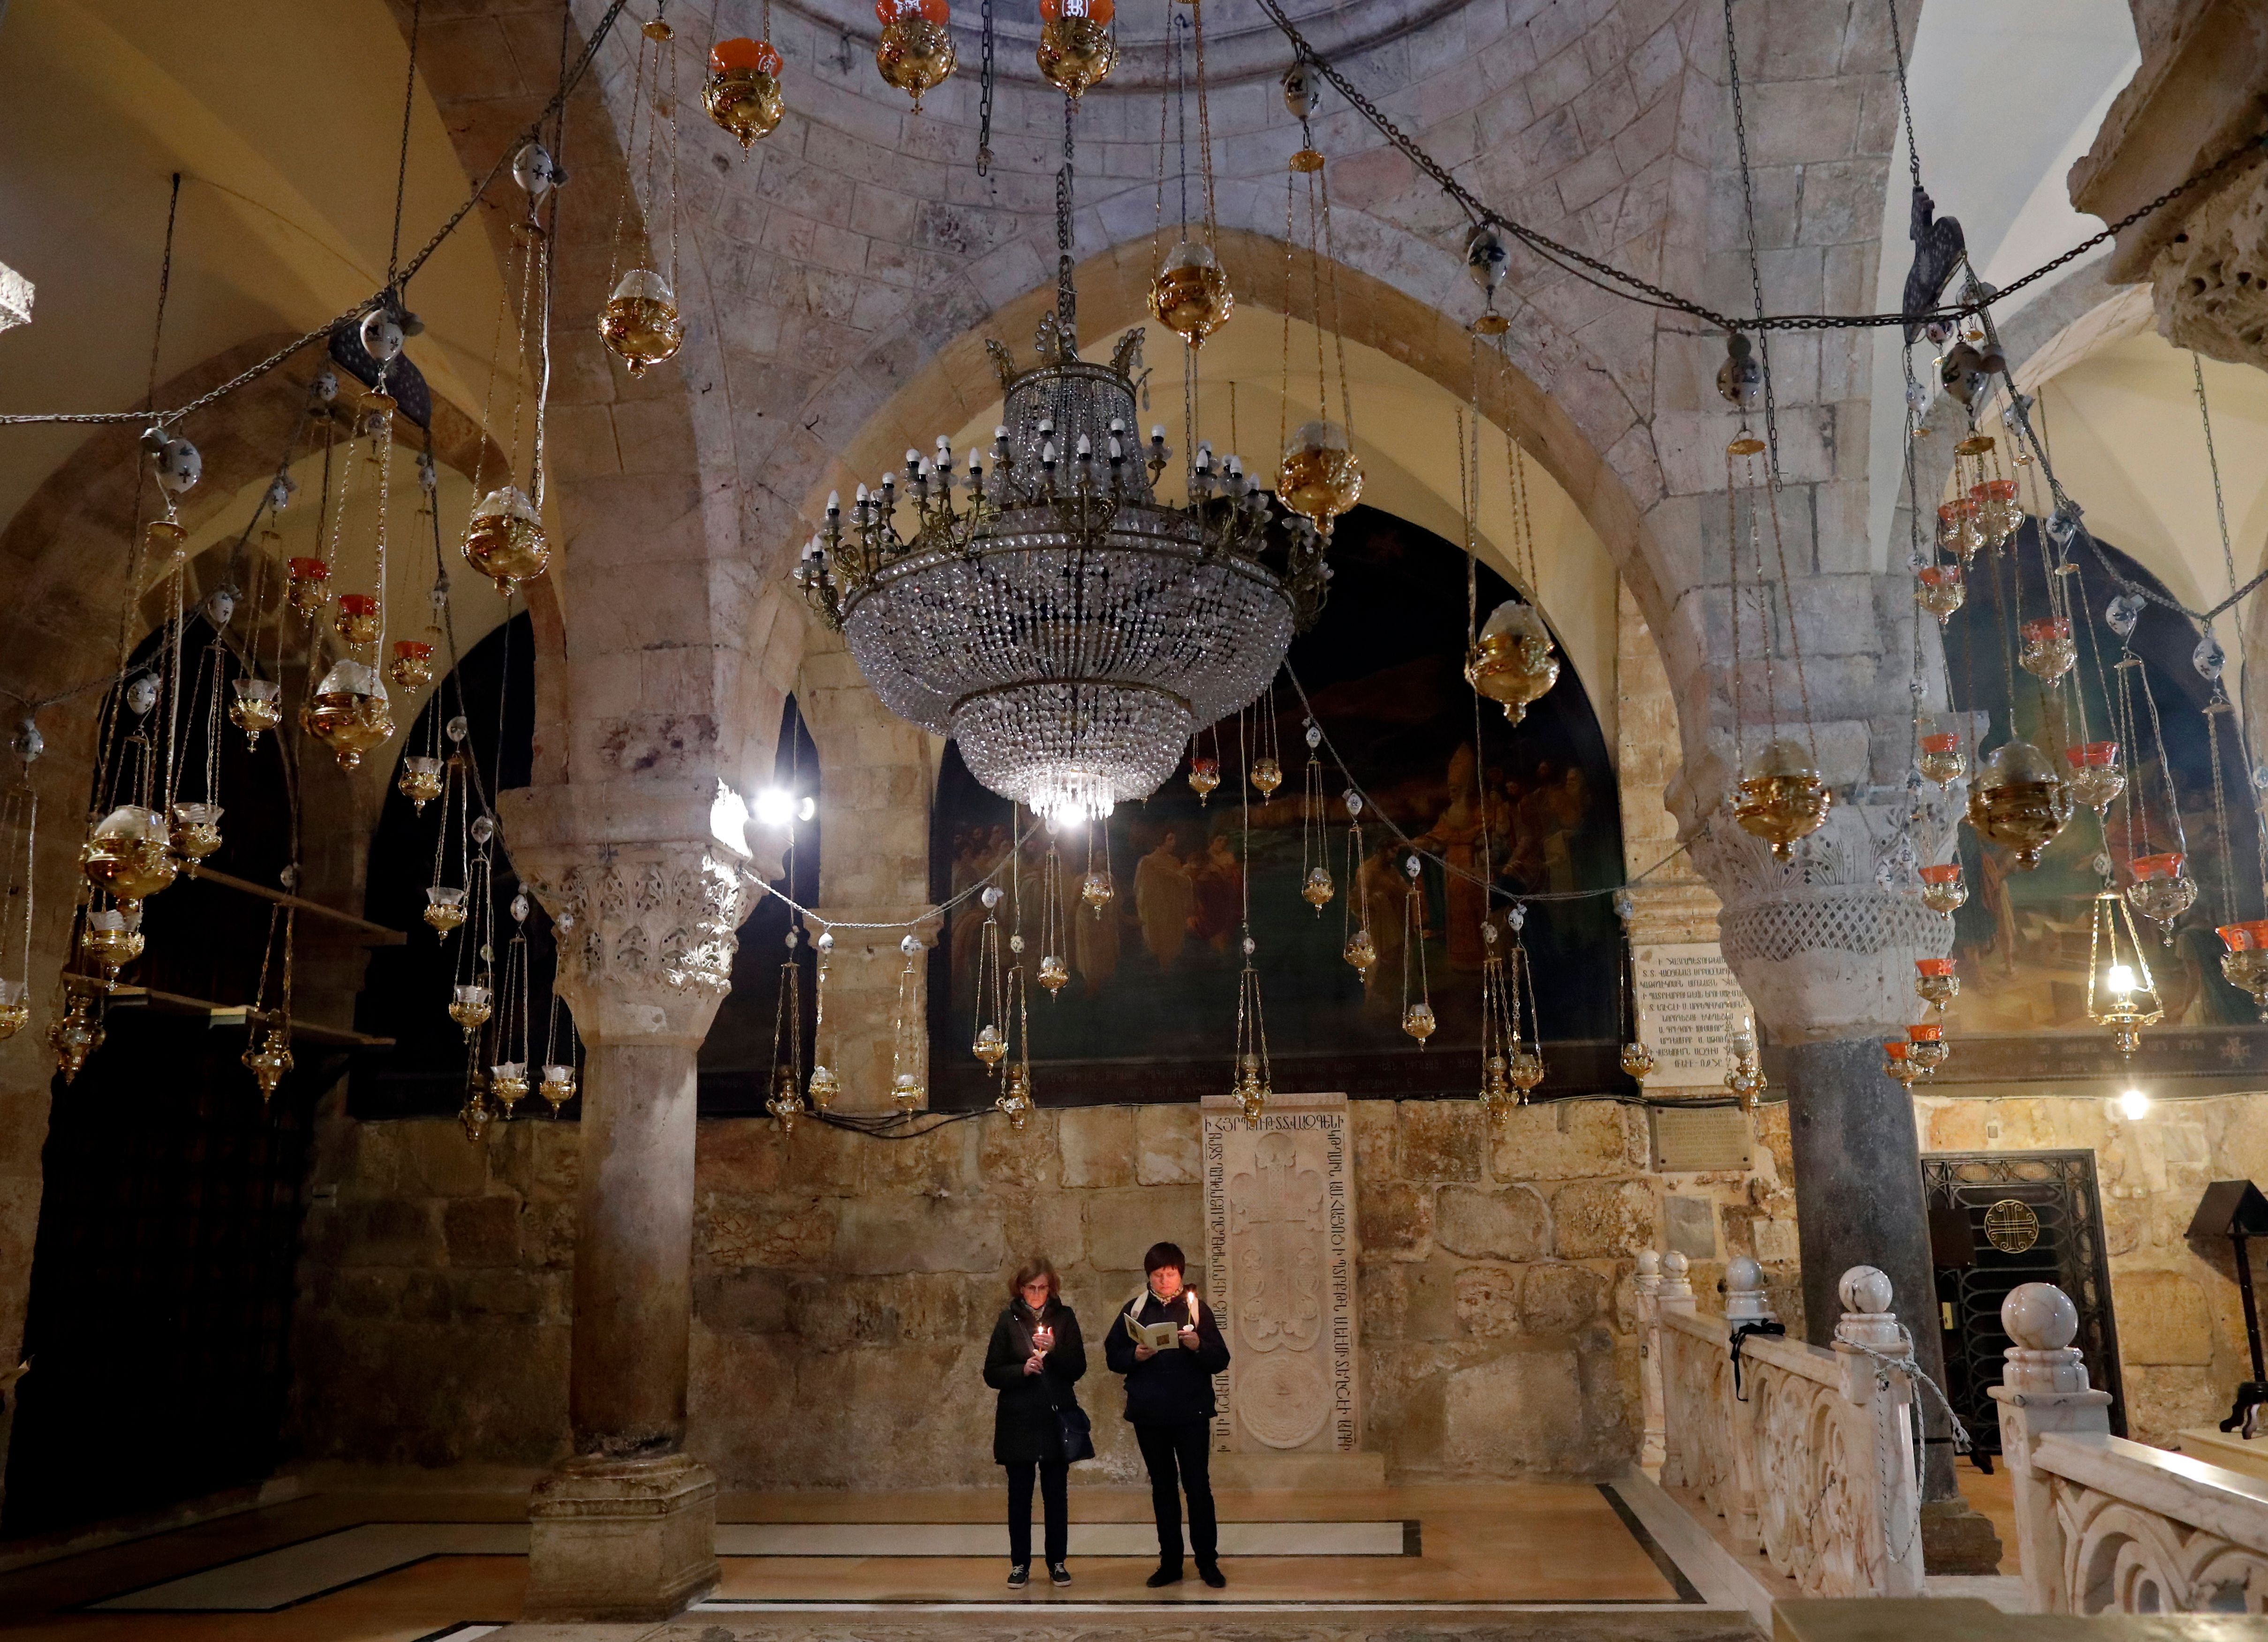 Christian worshippers pray at the Saint Helena chapel inside the Church of the Holy Sepulchre during a procession in the Old City of Jerusalem, on February 15, 2018. (THOMAS COEX/AFP/Getty Images)